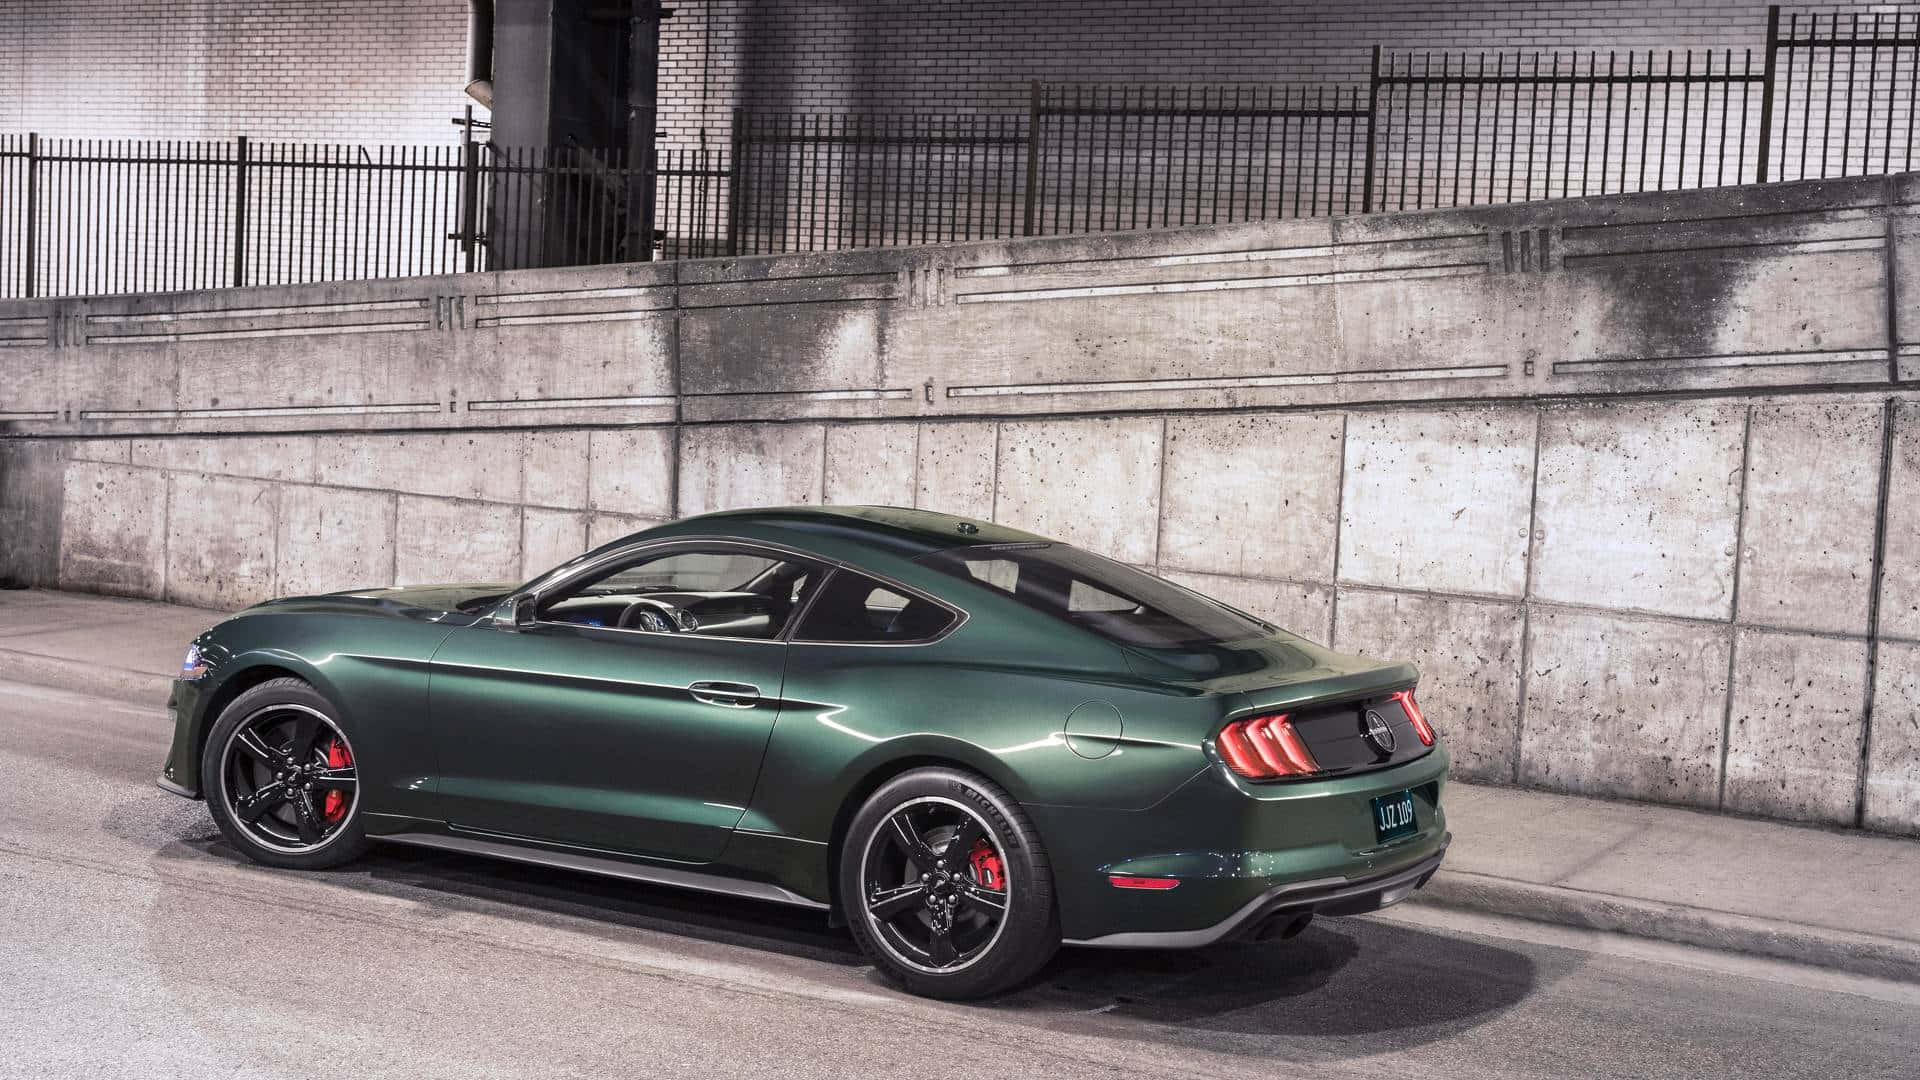 Ford Mustang Bullitt - A Classic Tribute to American Muscle Cars Wallpaper